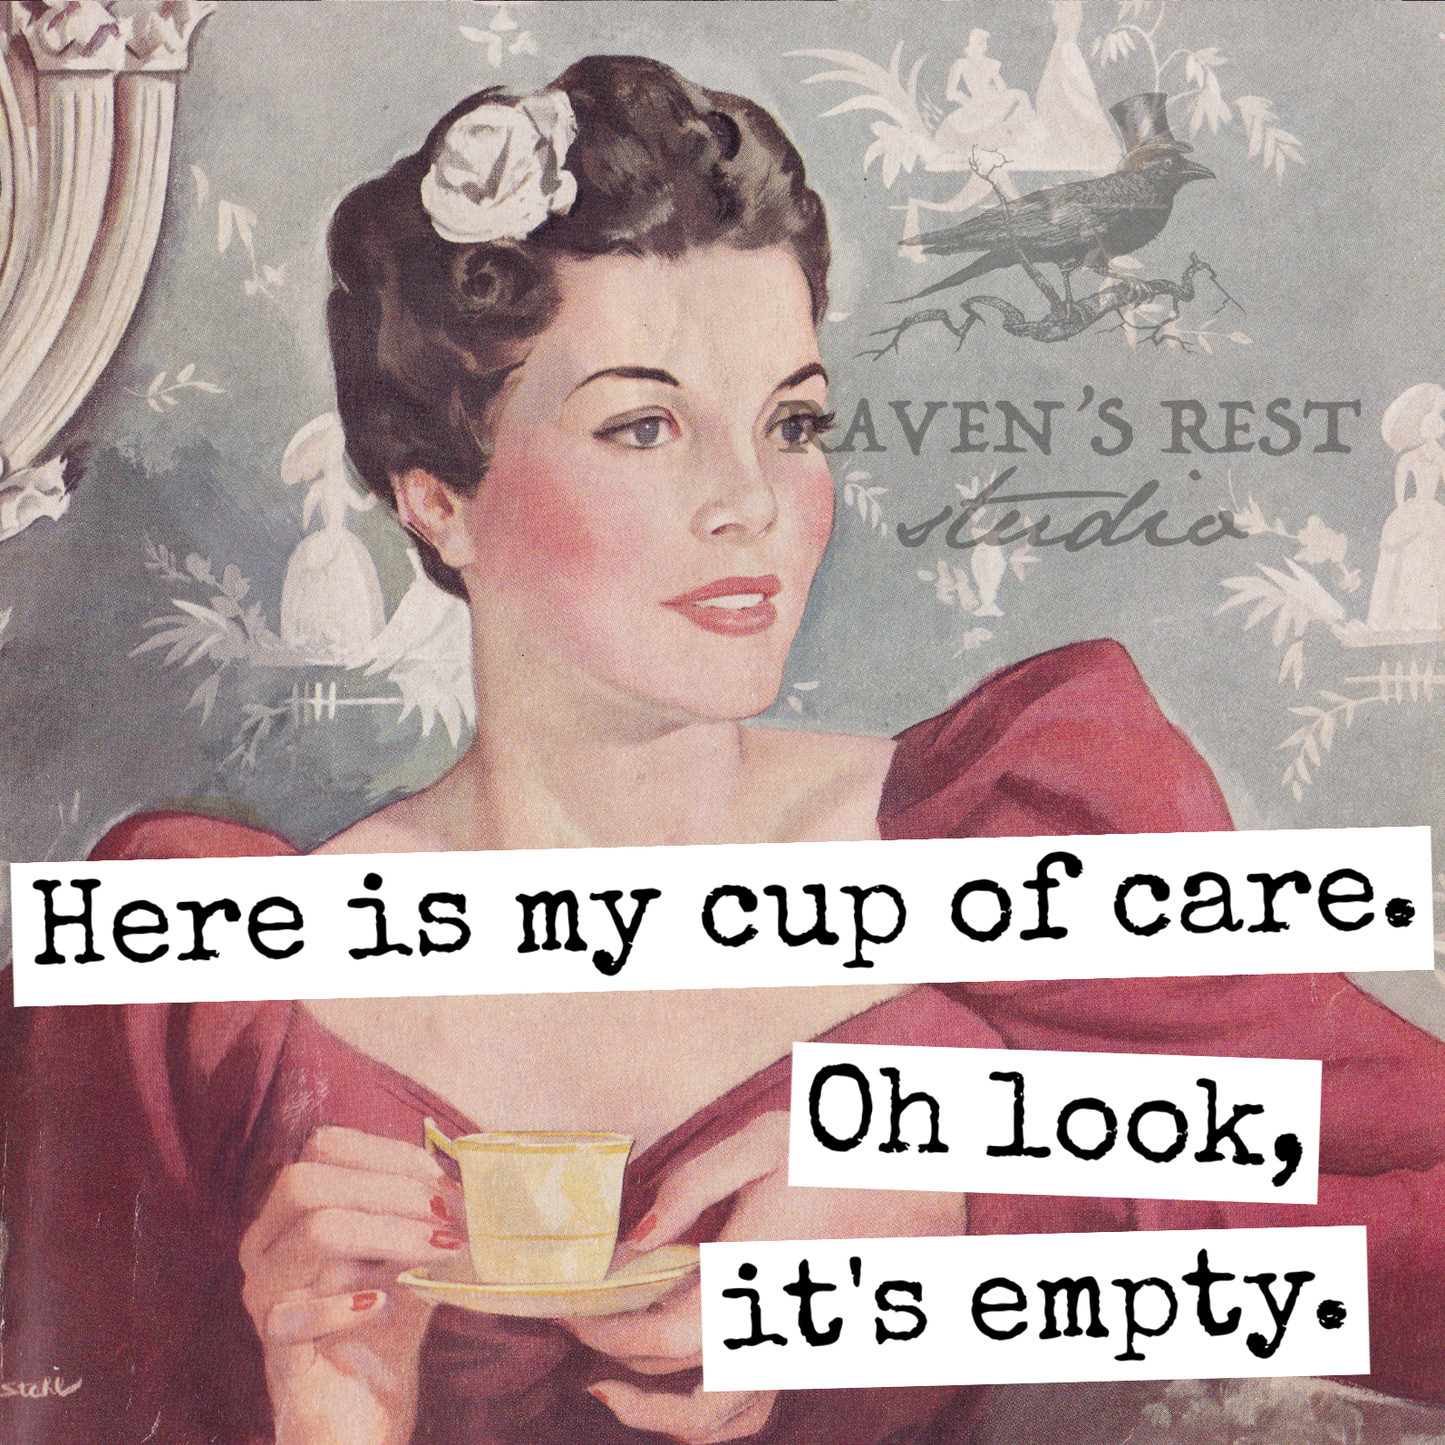 Raven's Rest Magnet - Here Is My Cup of Care. Oh Look, It's Empty